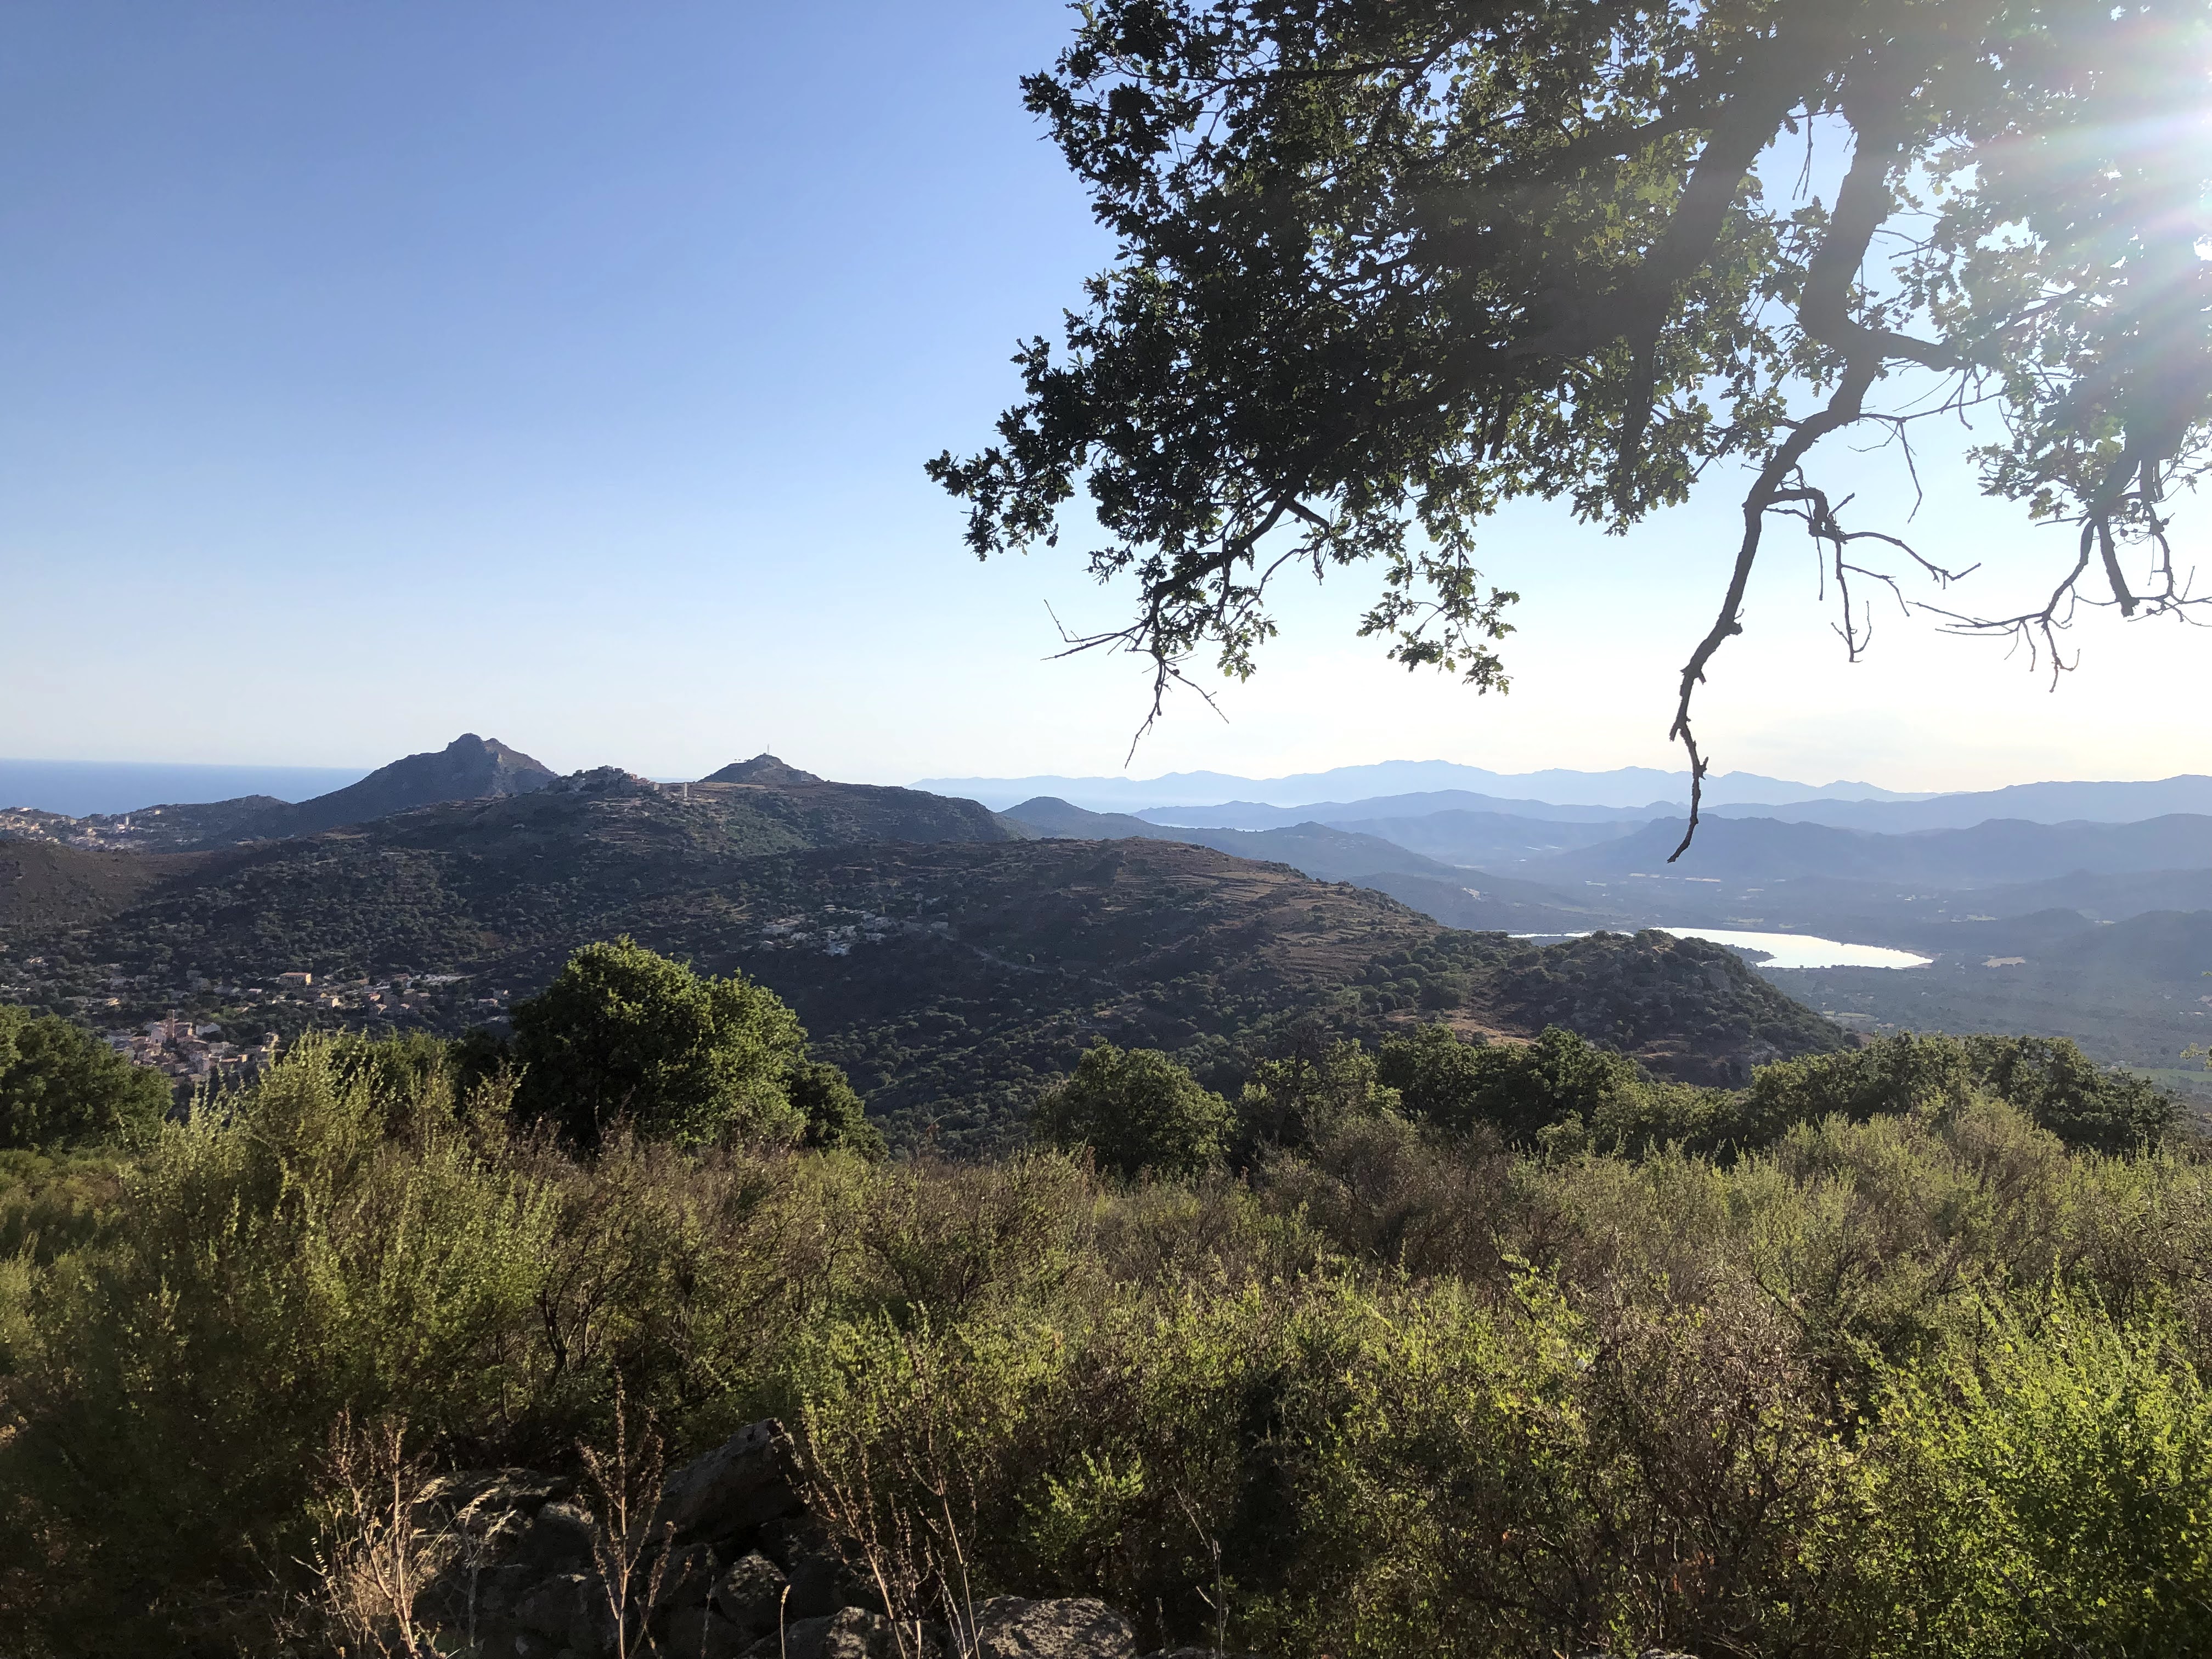 A view of the hills near the city of Ile Rousse